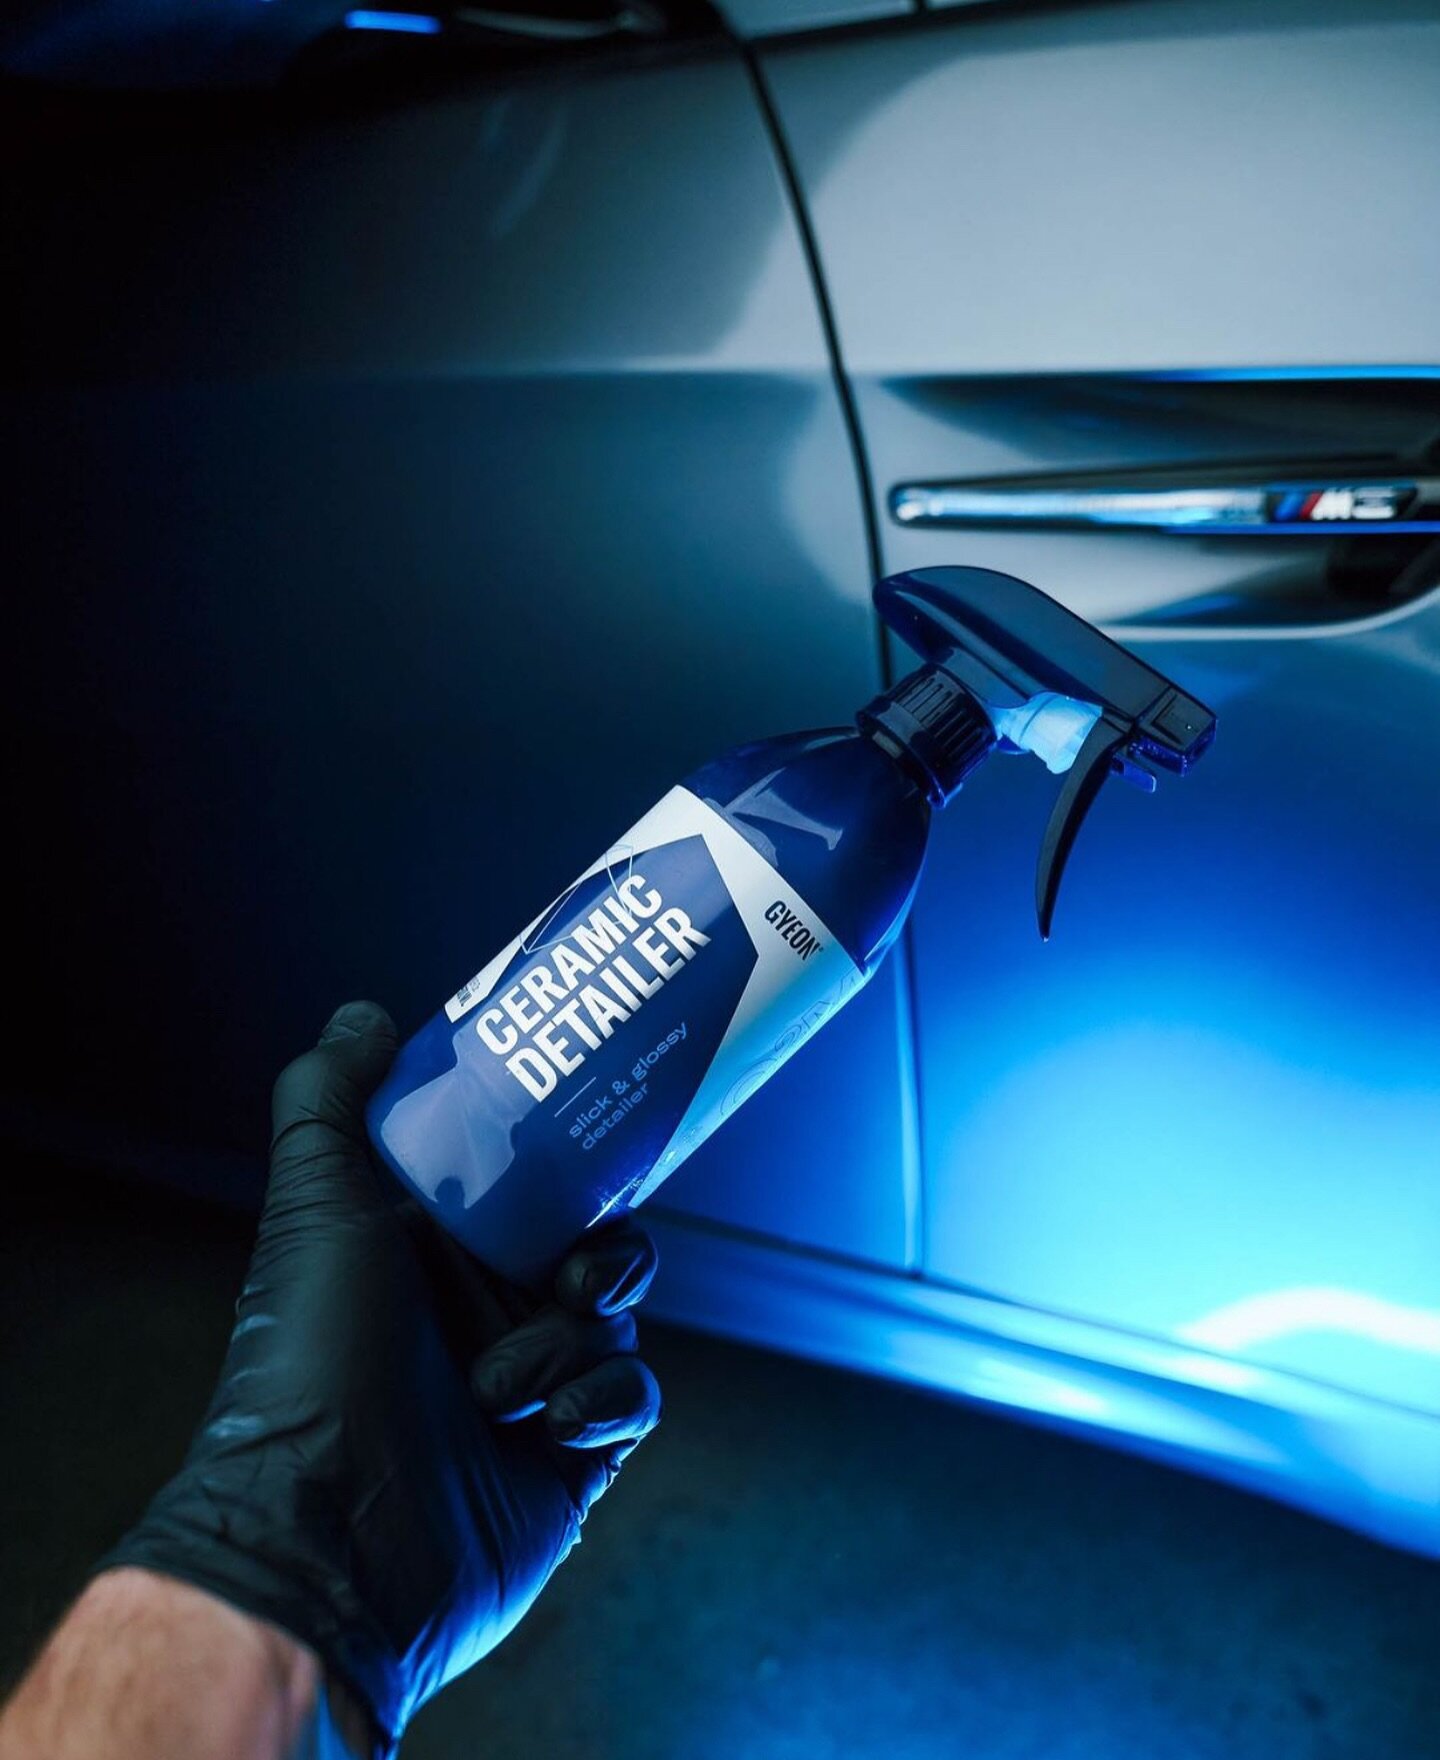 QM Ceramic Detailer, a quick and easy ceramic detail spray.
Q&rsquo;M Ceramic Detailer is Si02 infused to deliver glossy finishes, durable protection, impressive water beading, and fantastic dirt repellency.
Its application is pretty straightforward.